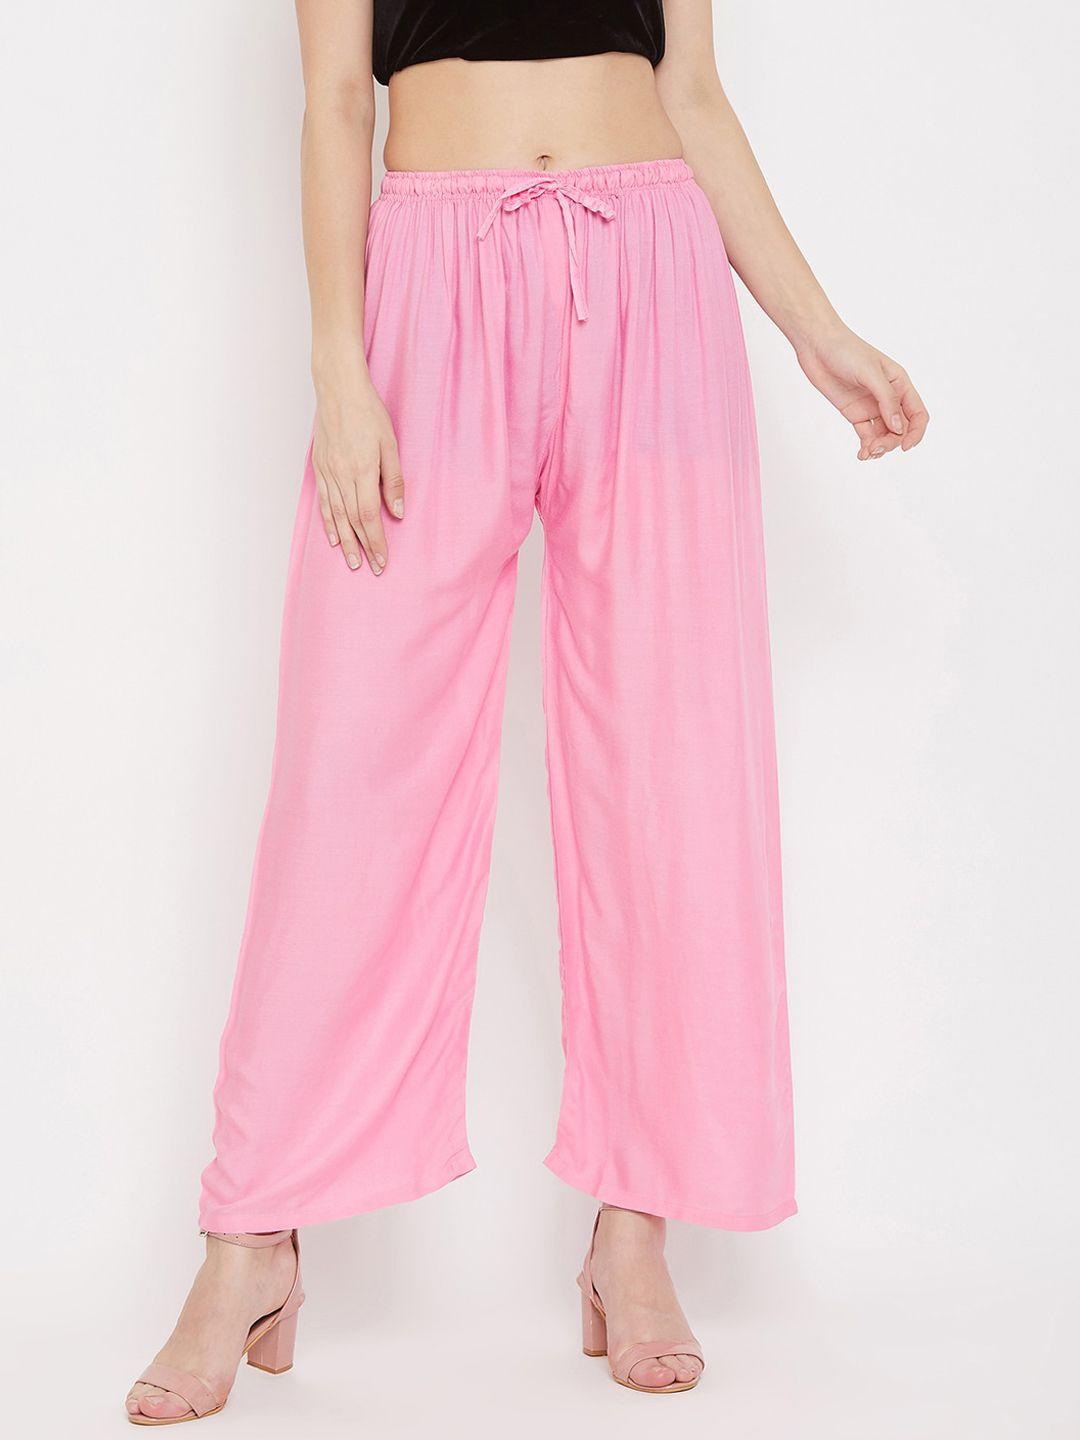 clora creation women pink solid flared palazzos